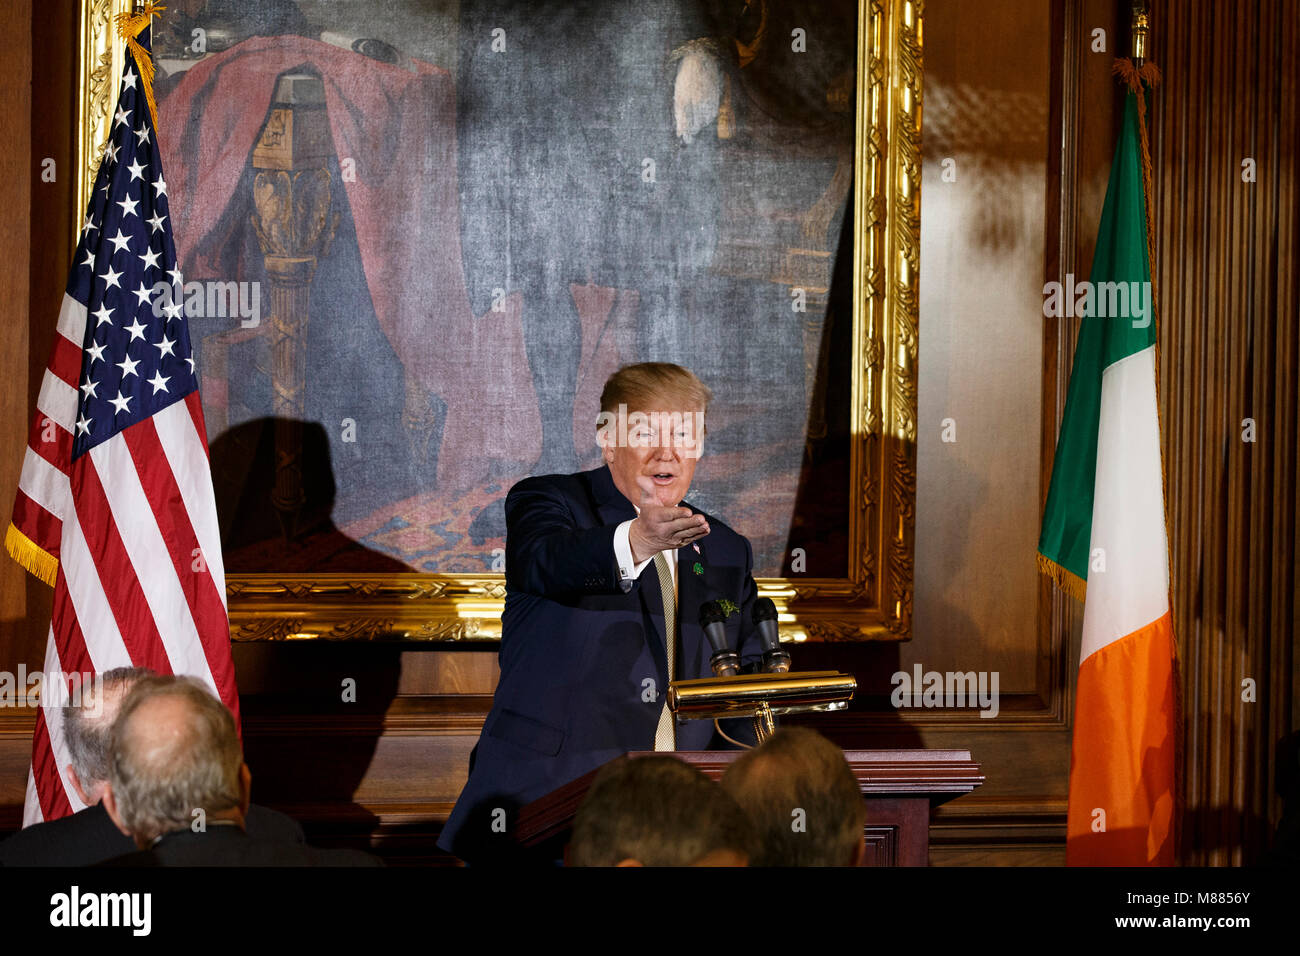 United States President Donald J. Trump speaks at the Friends of Ireland luncheon hosted by United States Speaker of the House of Representatives Paul Ryan, Republican of Wisconsin, at the United States Capitol in Washington, DC on March 15, 2018. Credit: Alex Edelman/CNP /MediaPunch Stock Photo